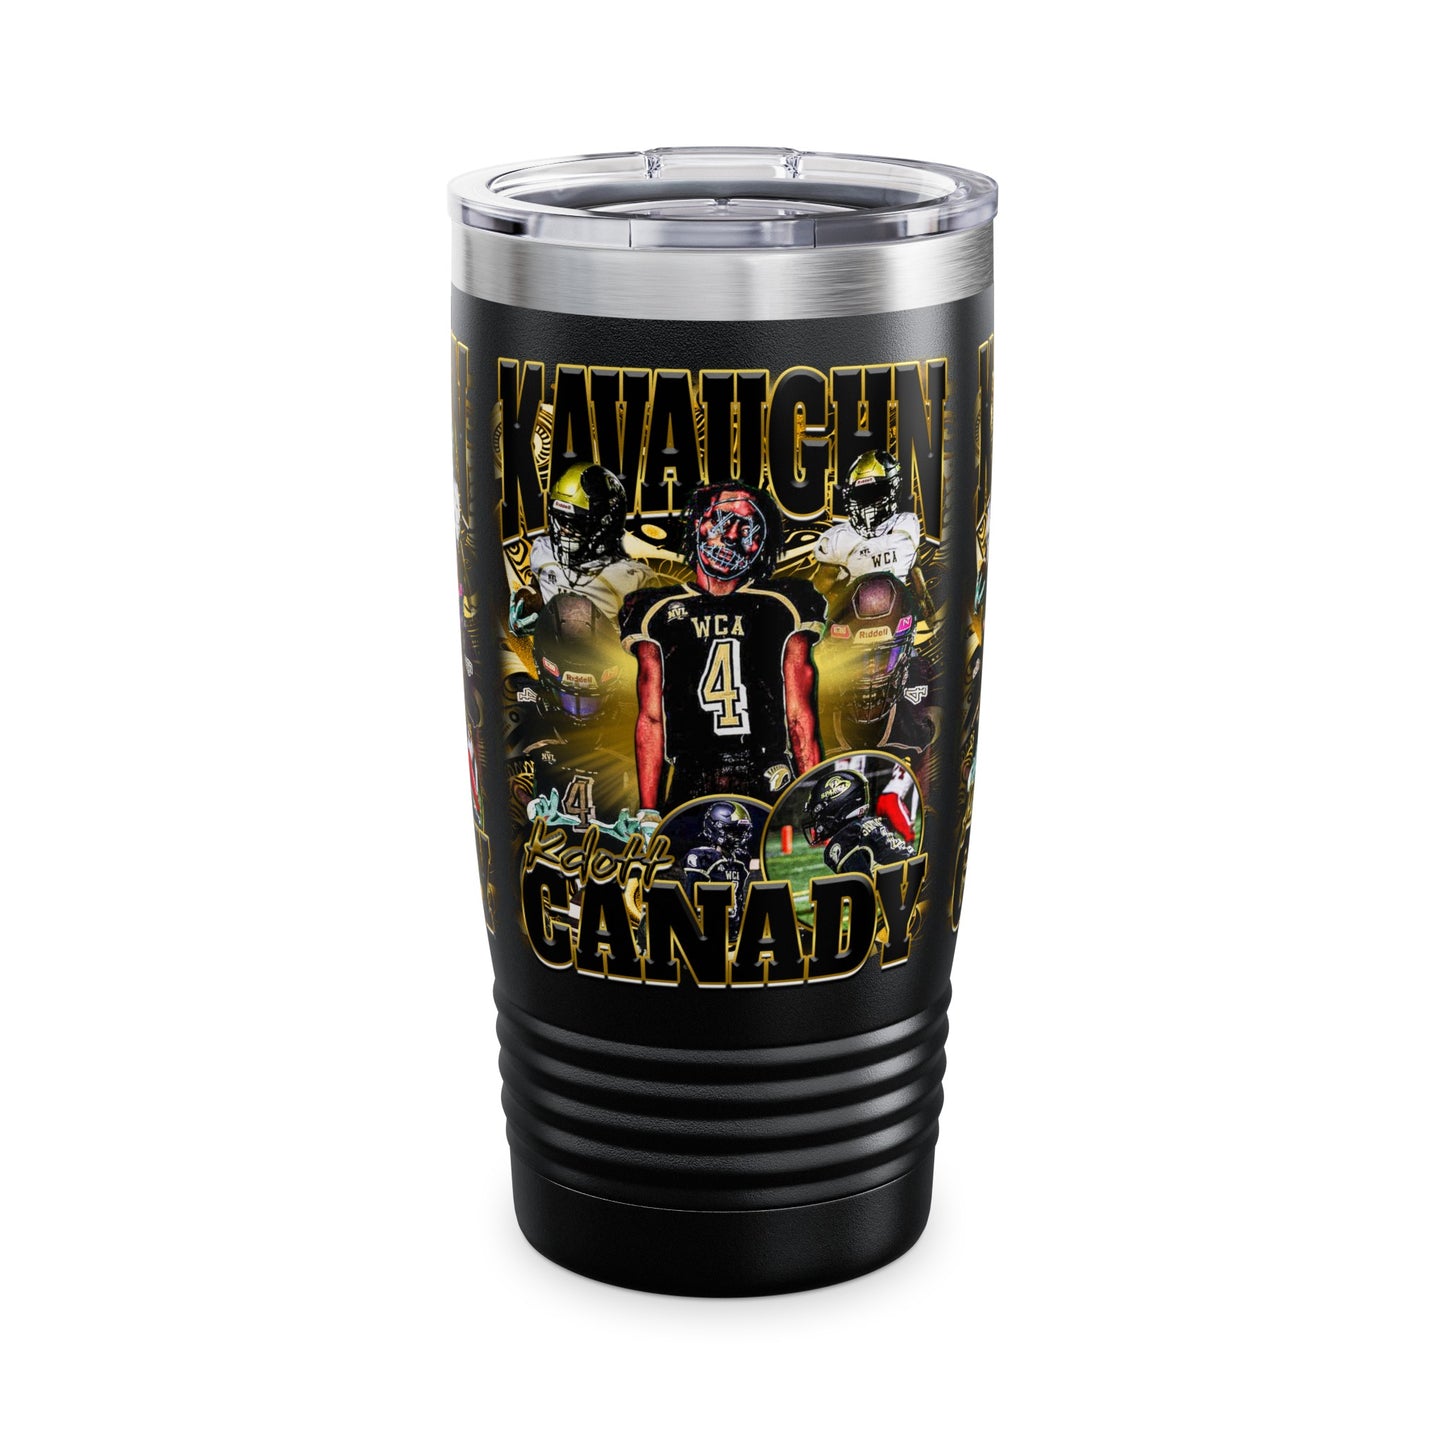 Kavaughn Canady Stainless Steal Tumbler